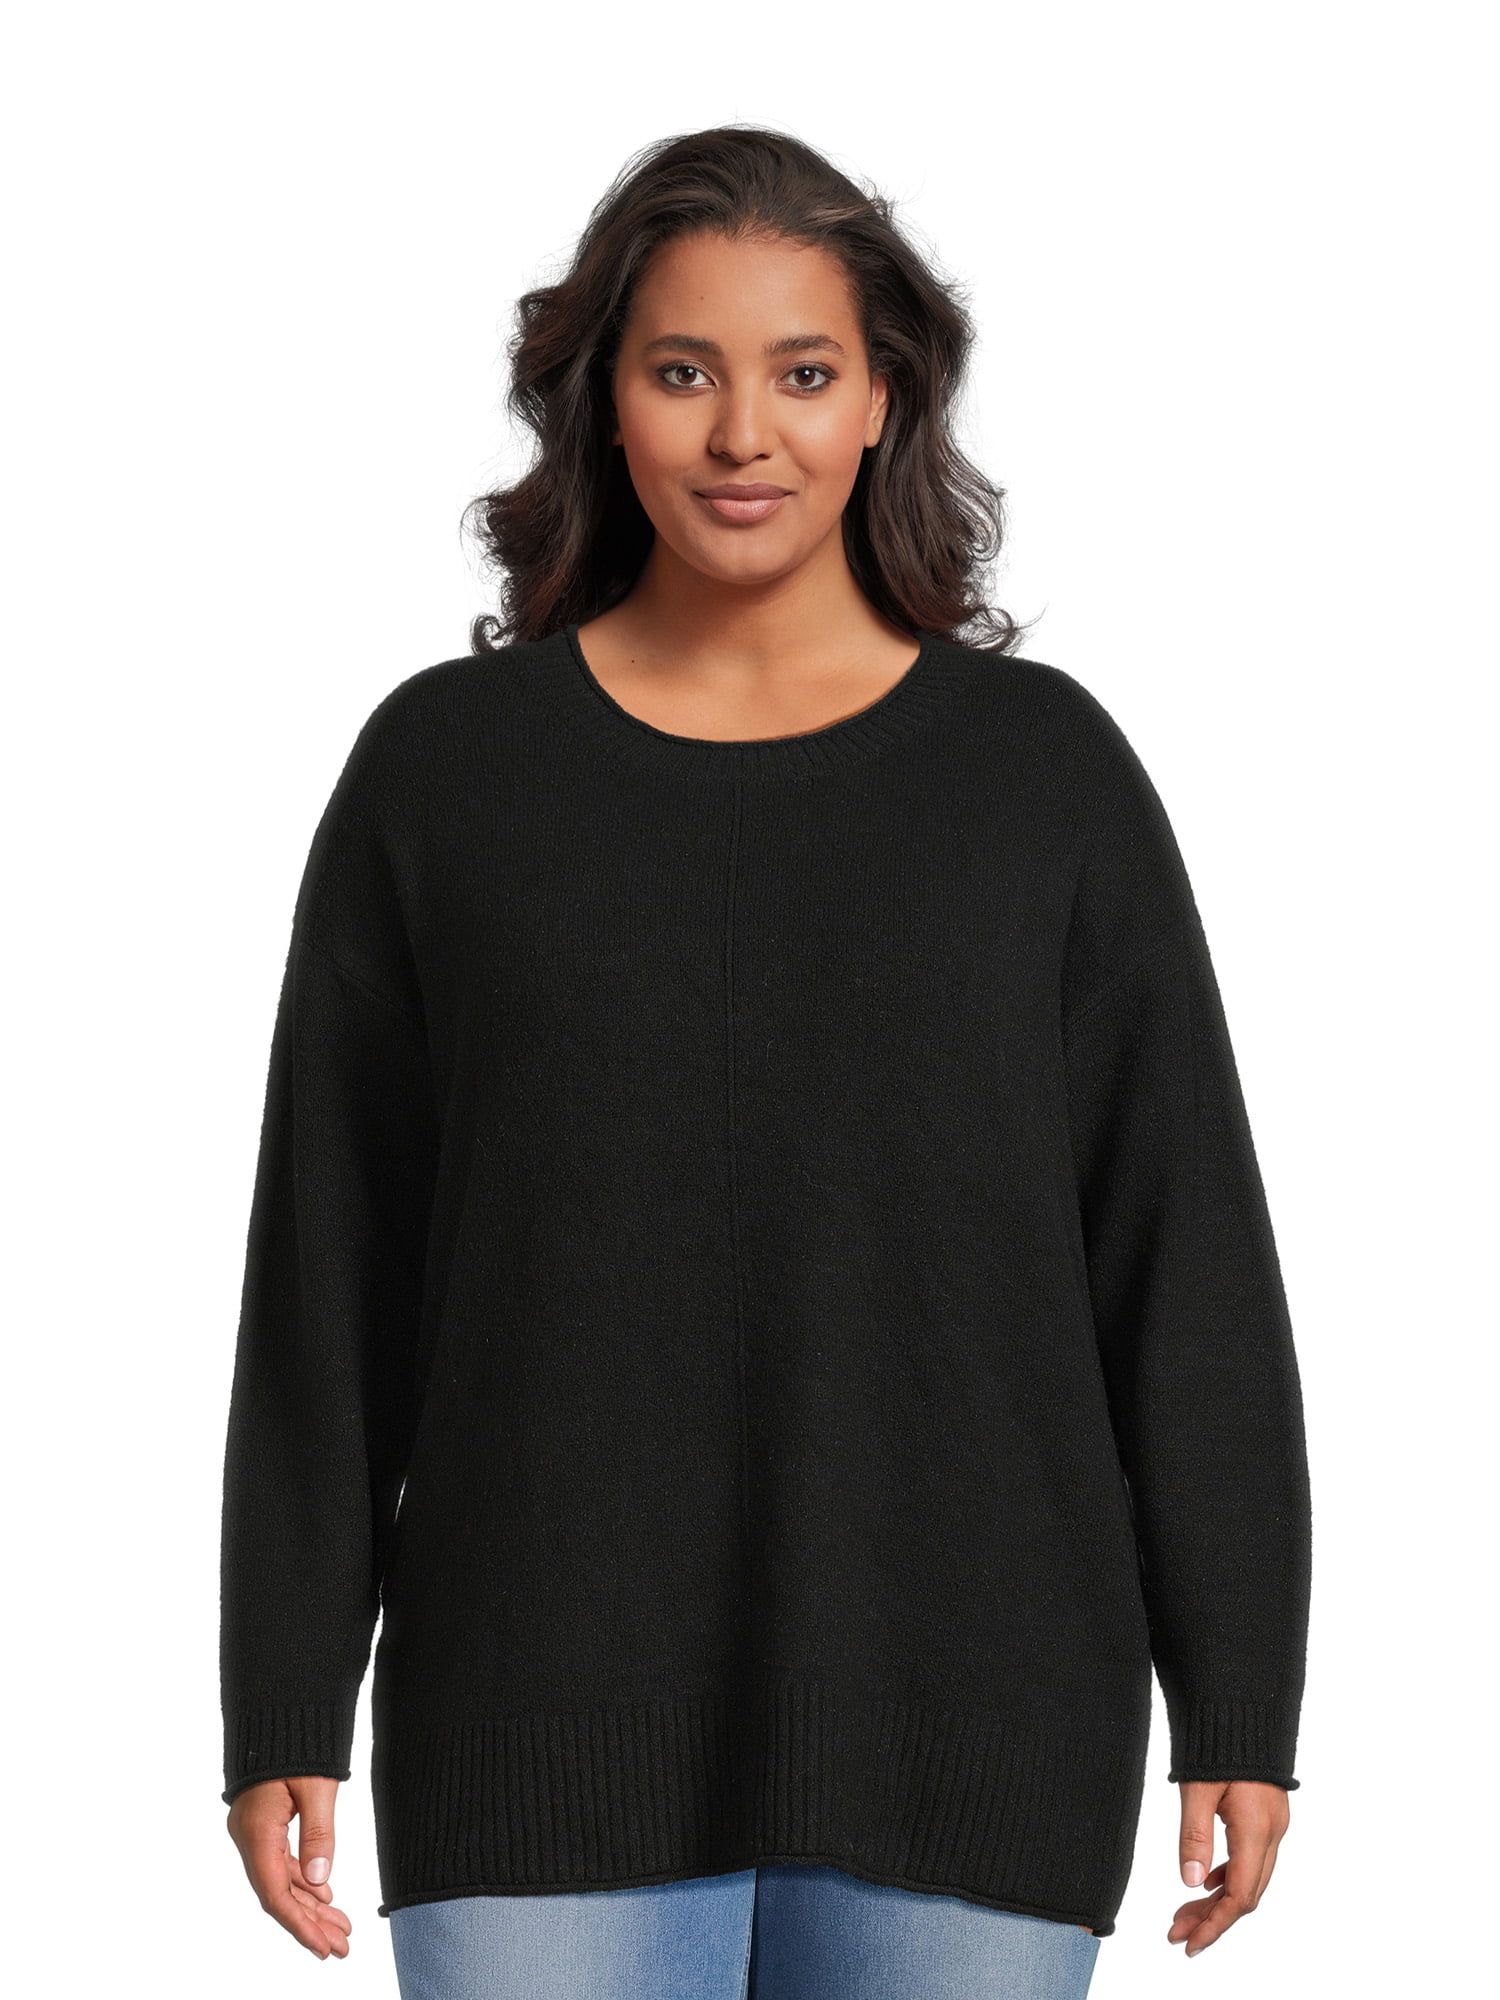 Terra & Sky Women's Plus Size Pullover Sweater with Center Seam, Midweight | Walmart (US)